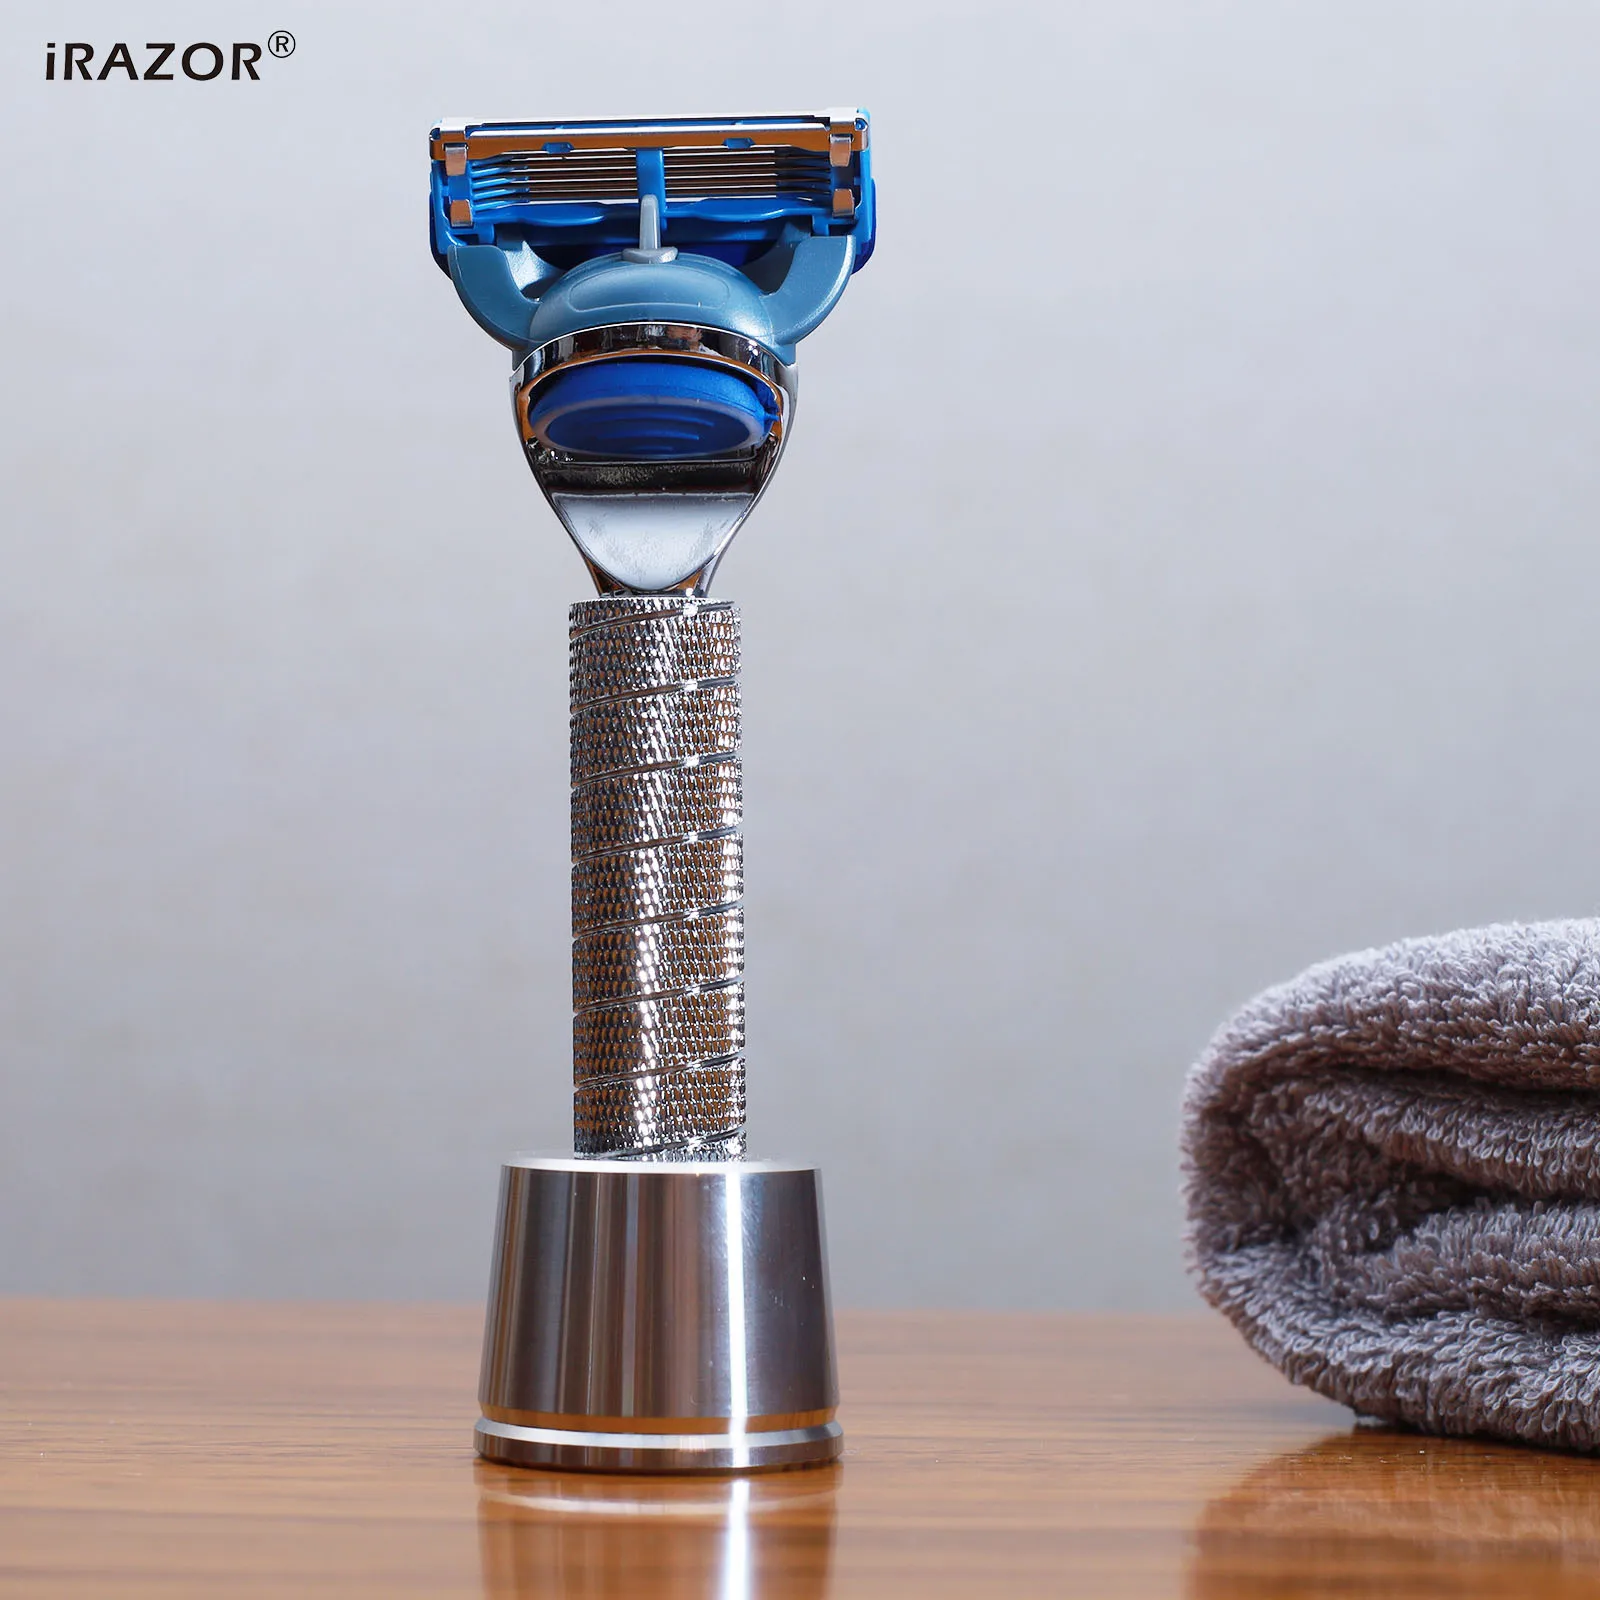 

iRAZOR Classic F5 5-Edges Fusion 5 Handle Razor Kit Chrome Shaver Barber Grooming Tool for Men with Stainless Steel Stand Holder